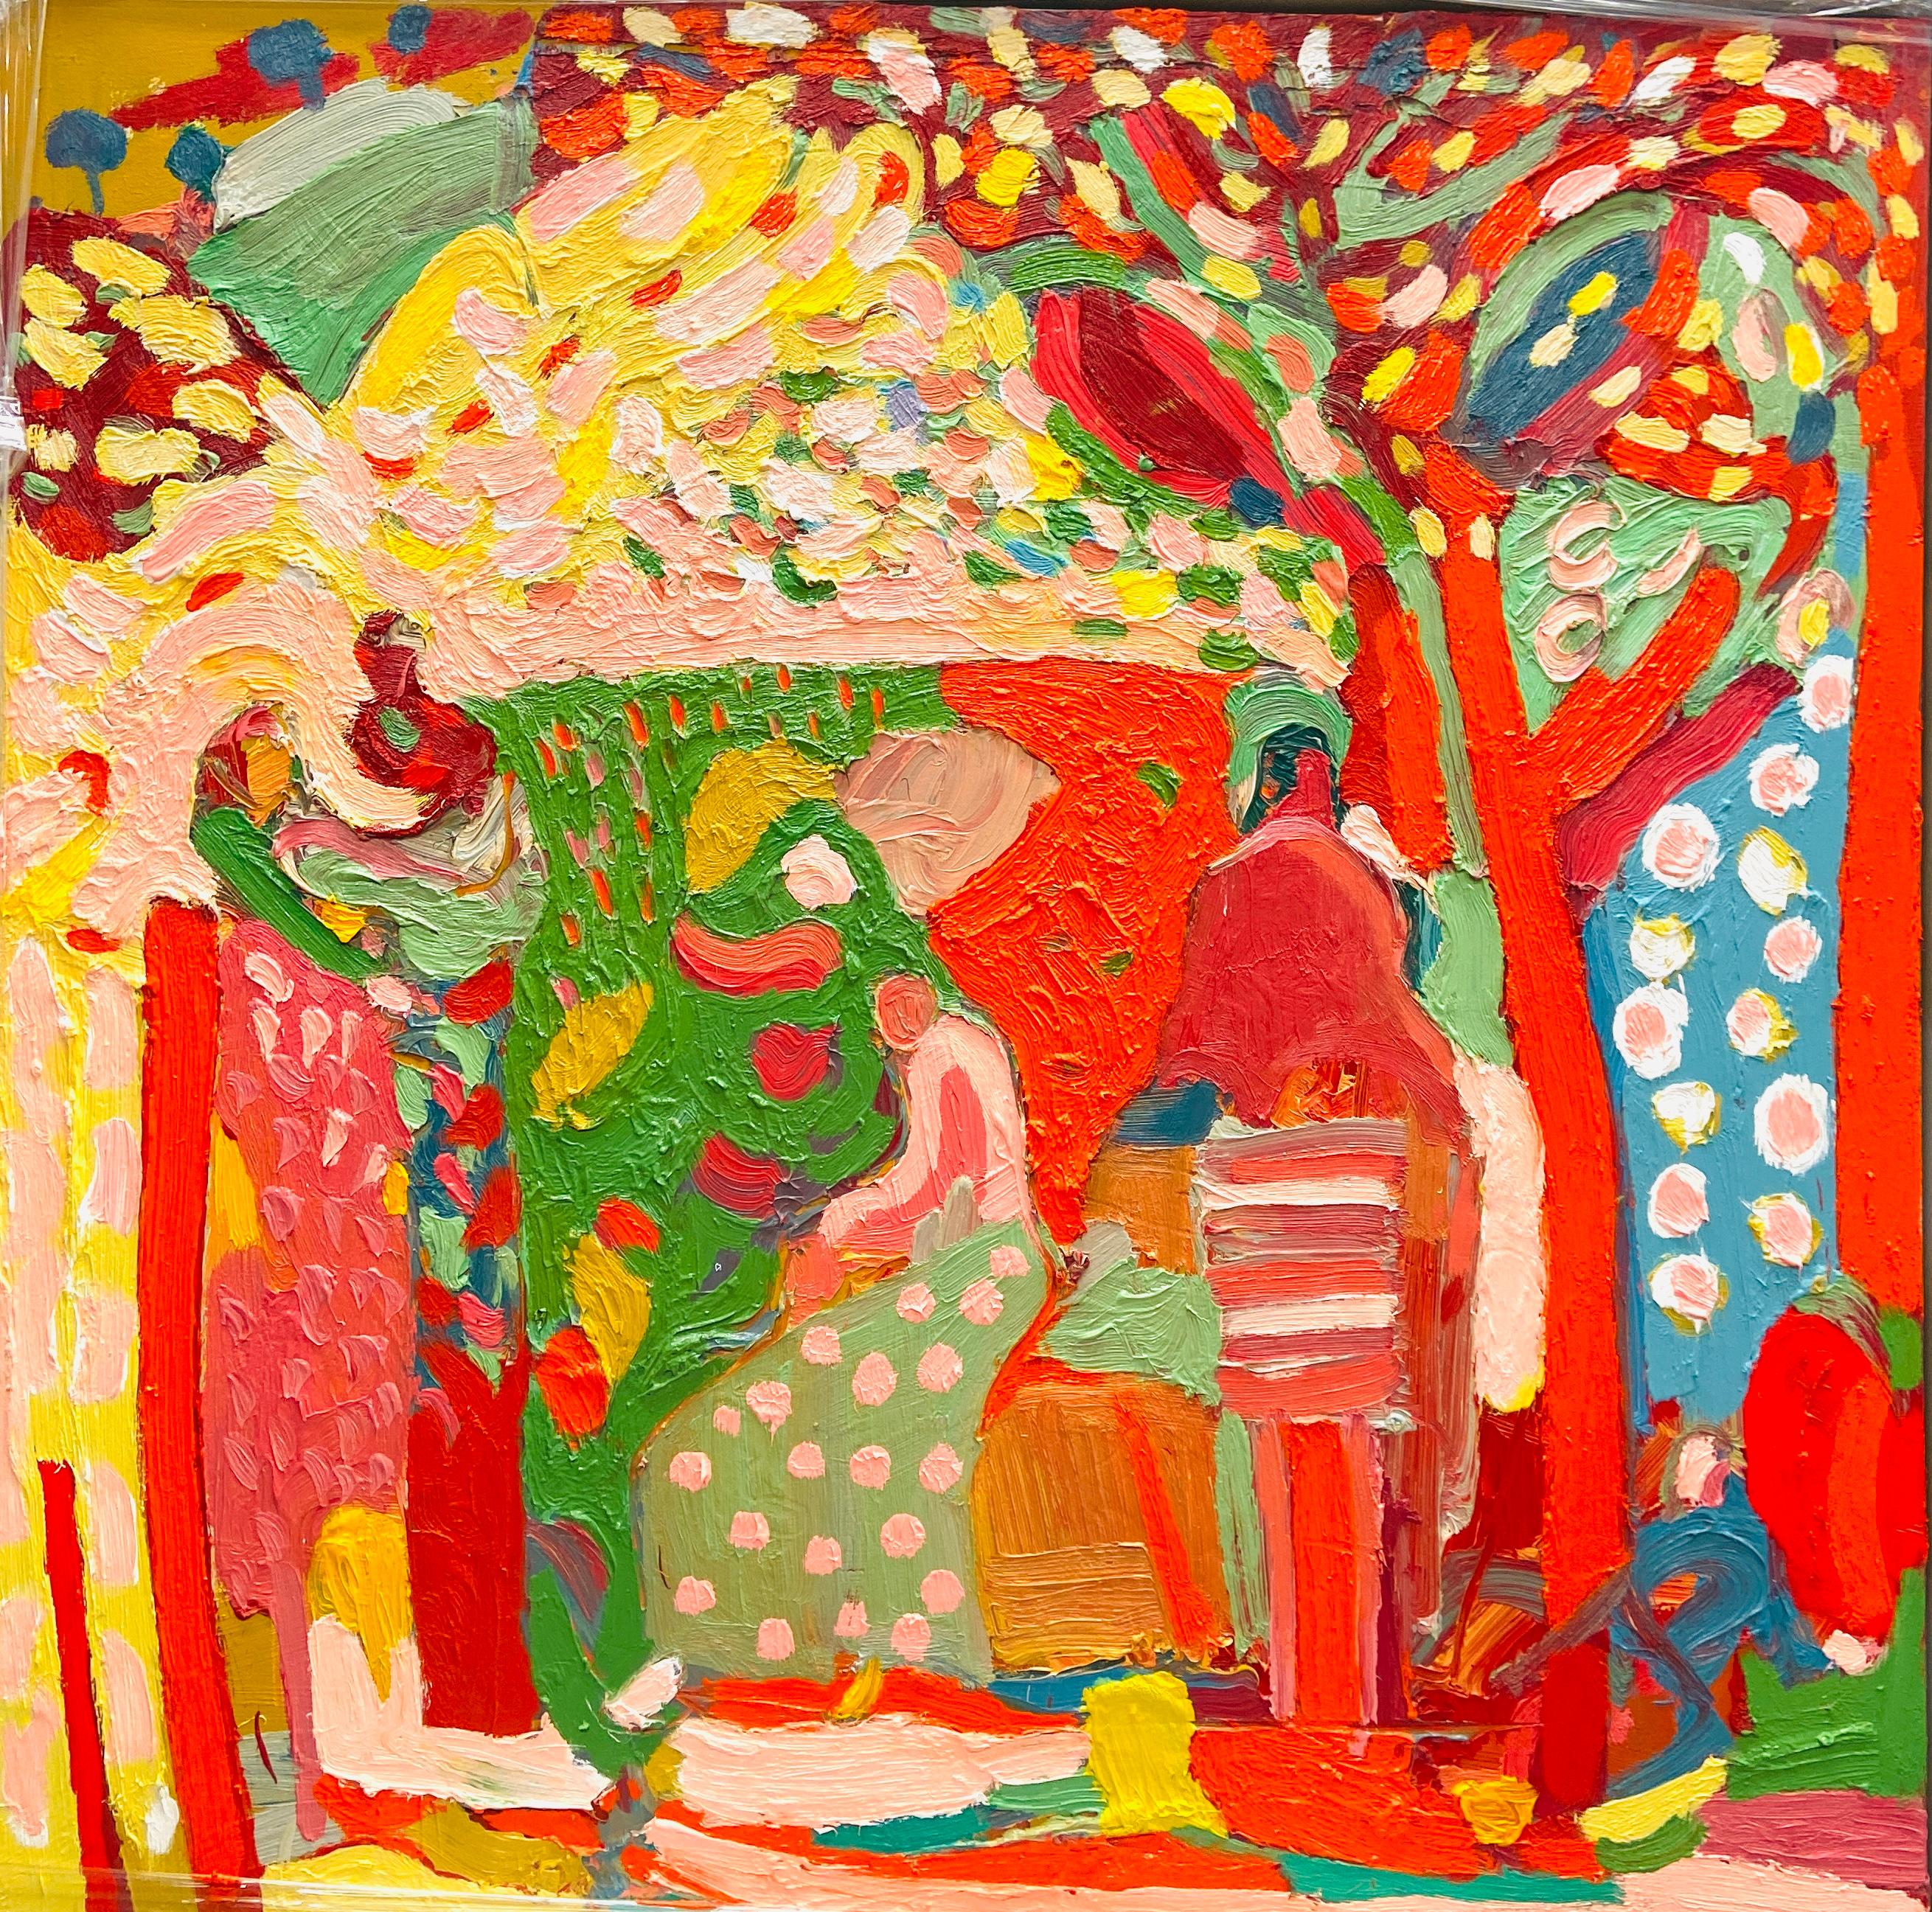 Paul wadsworth Figurative Painting - Rajisthan Garden: Contemporary Abstract Expressionist Oil Painting